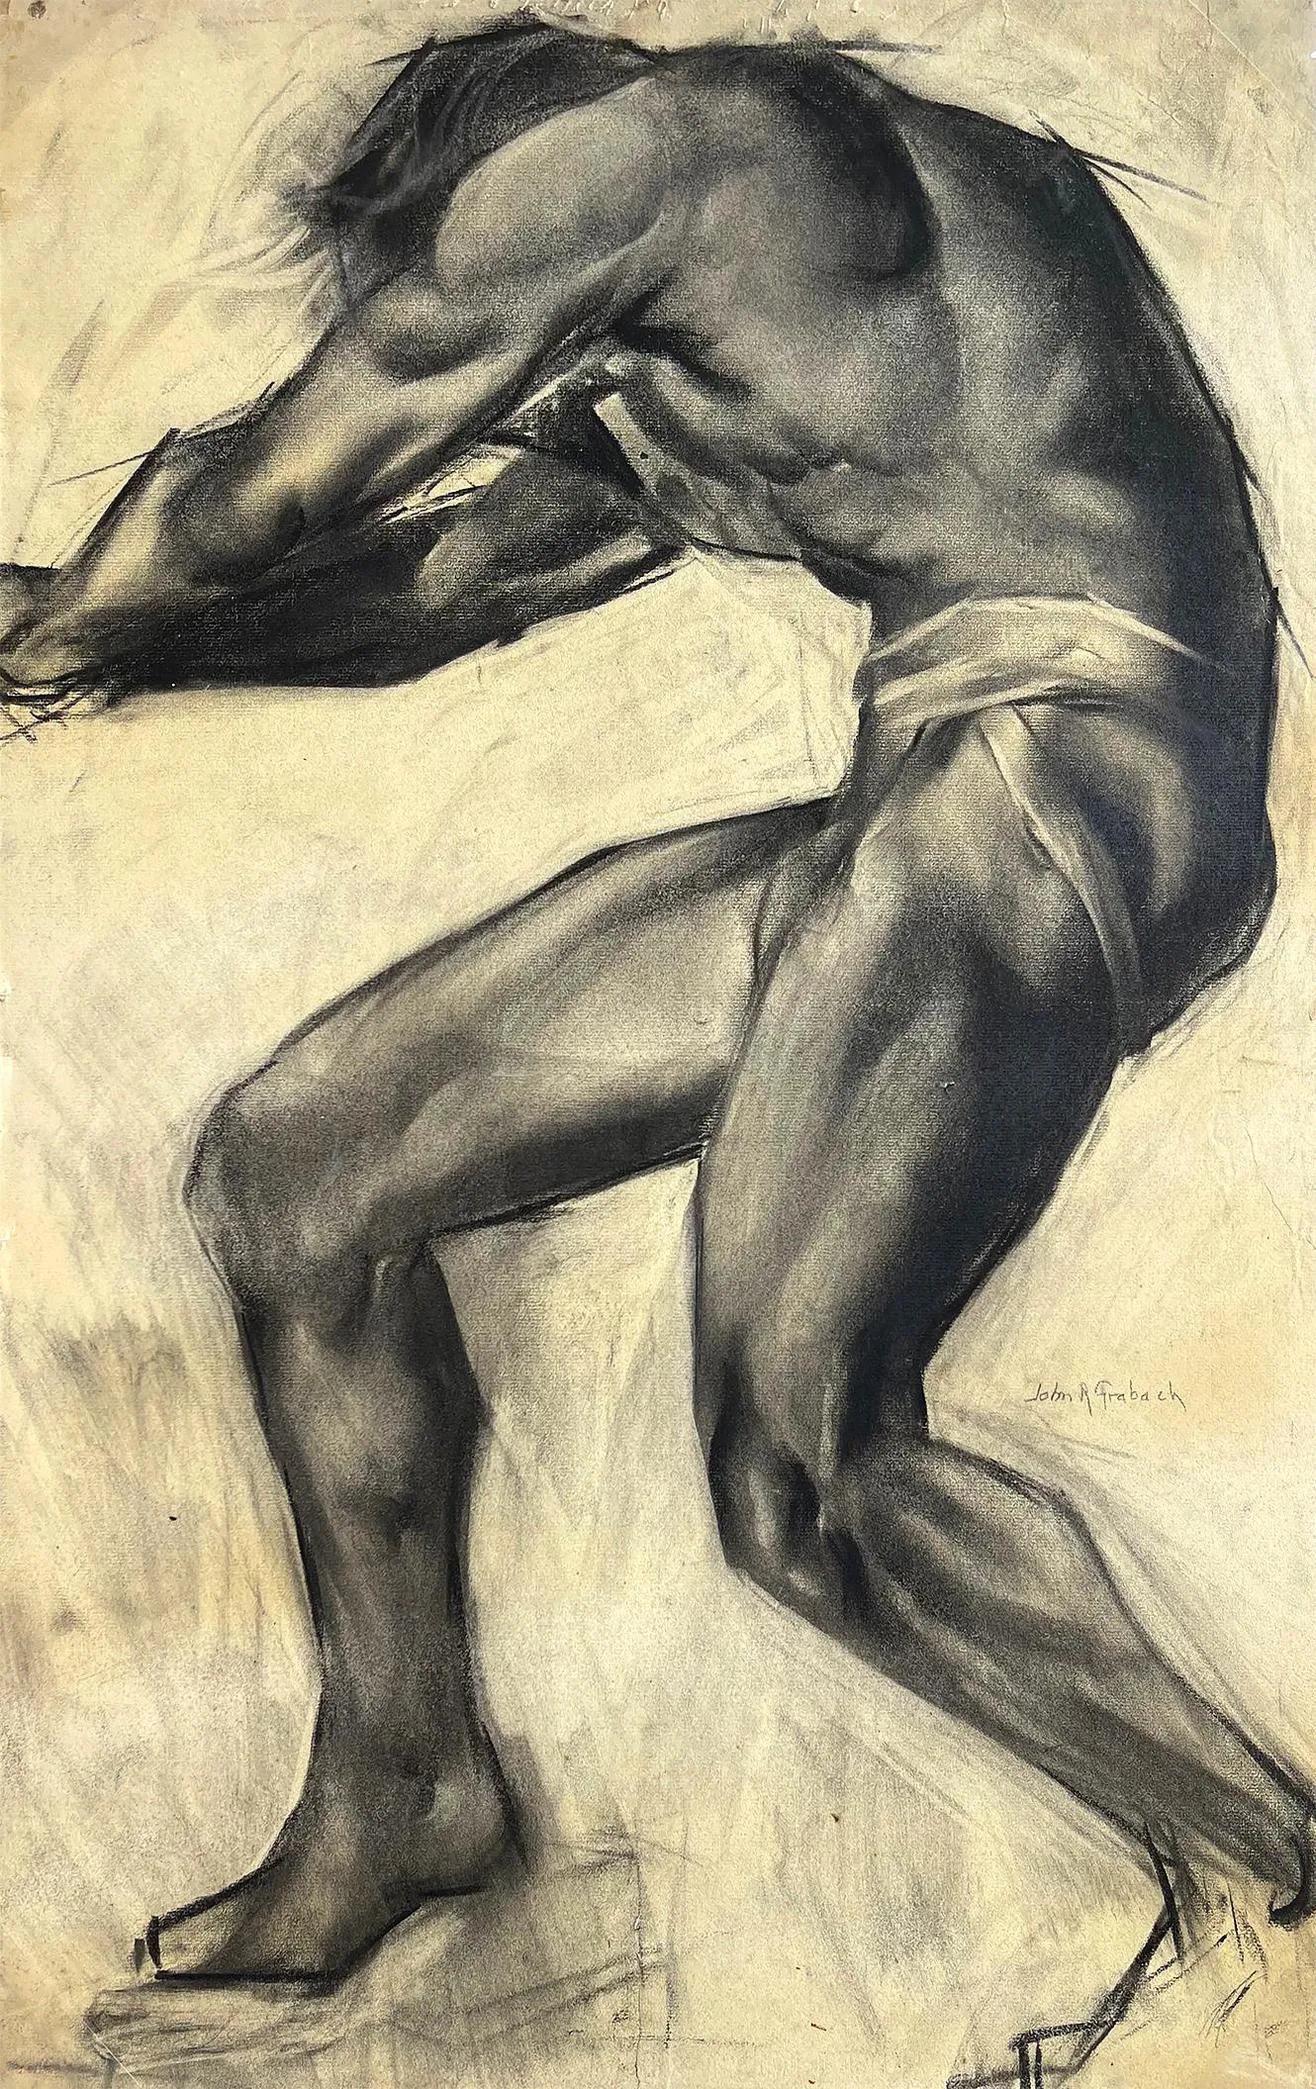 John R. Grabach - Muscular Male Nude with Bulging Muscles Art Deco